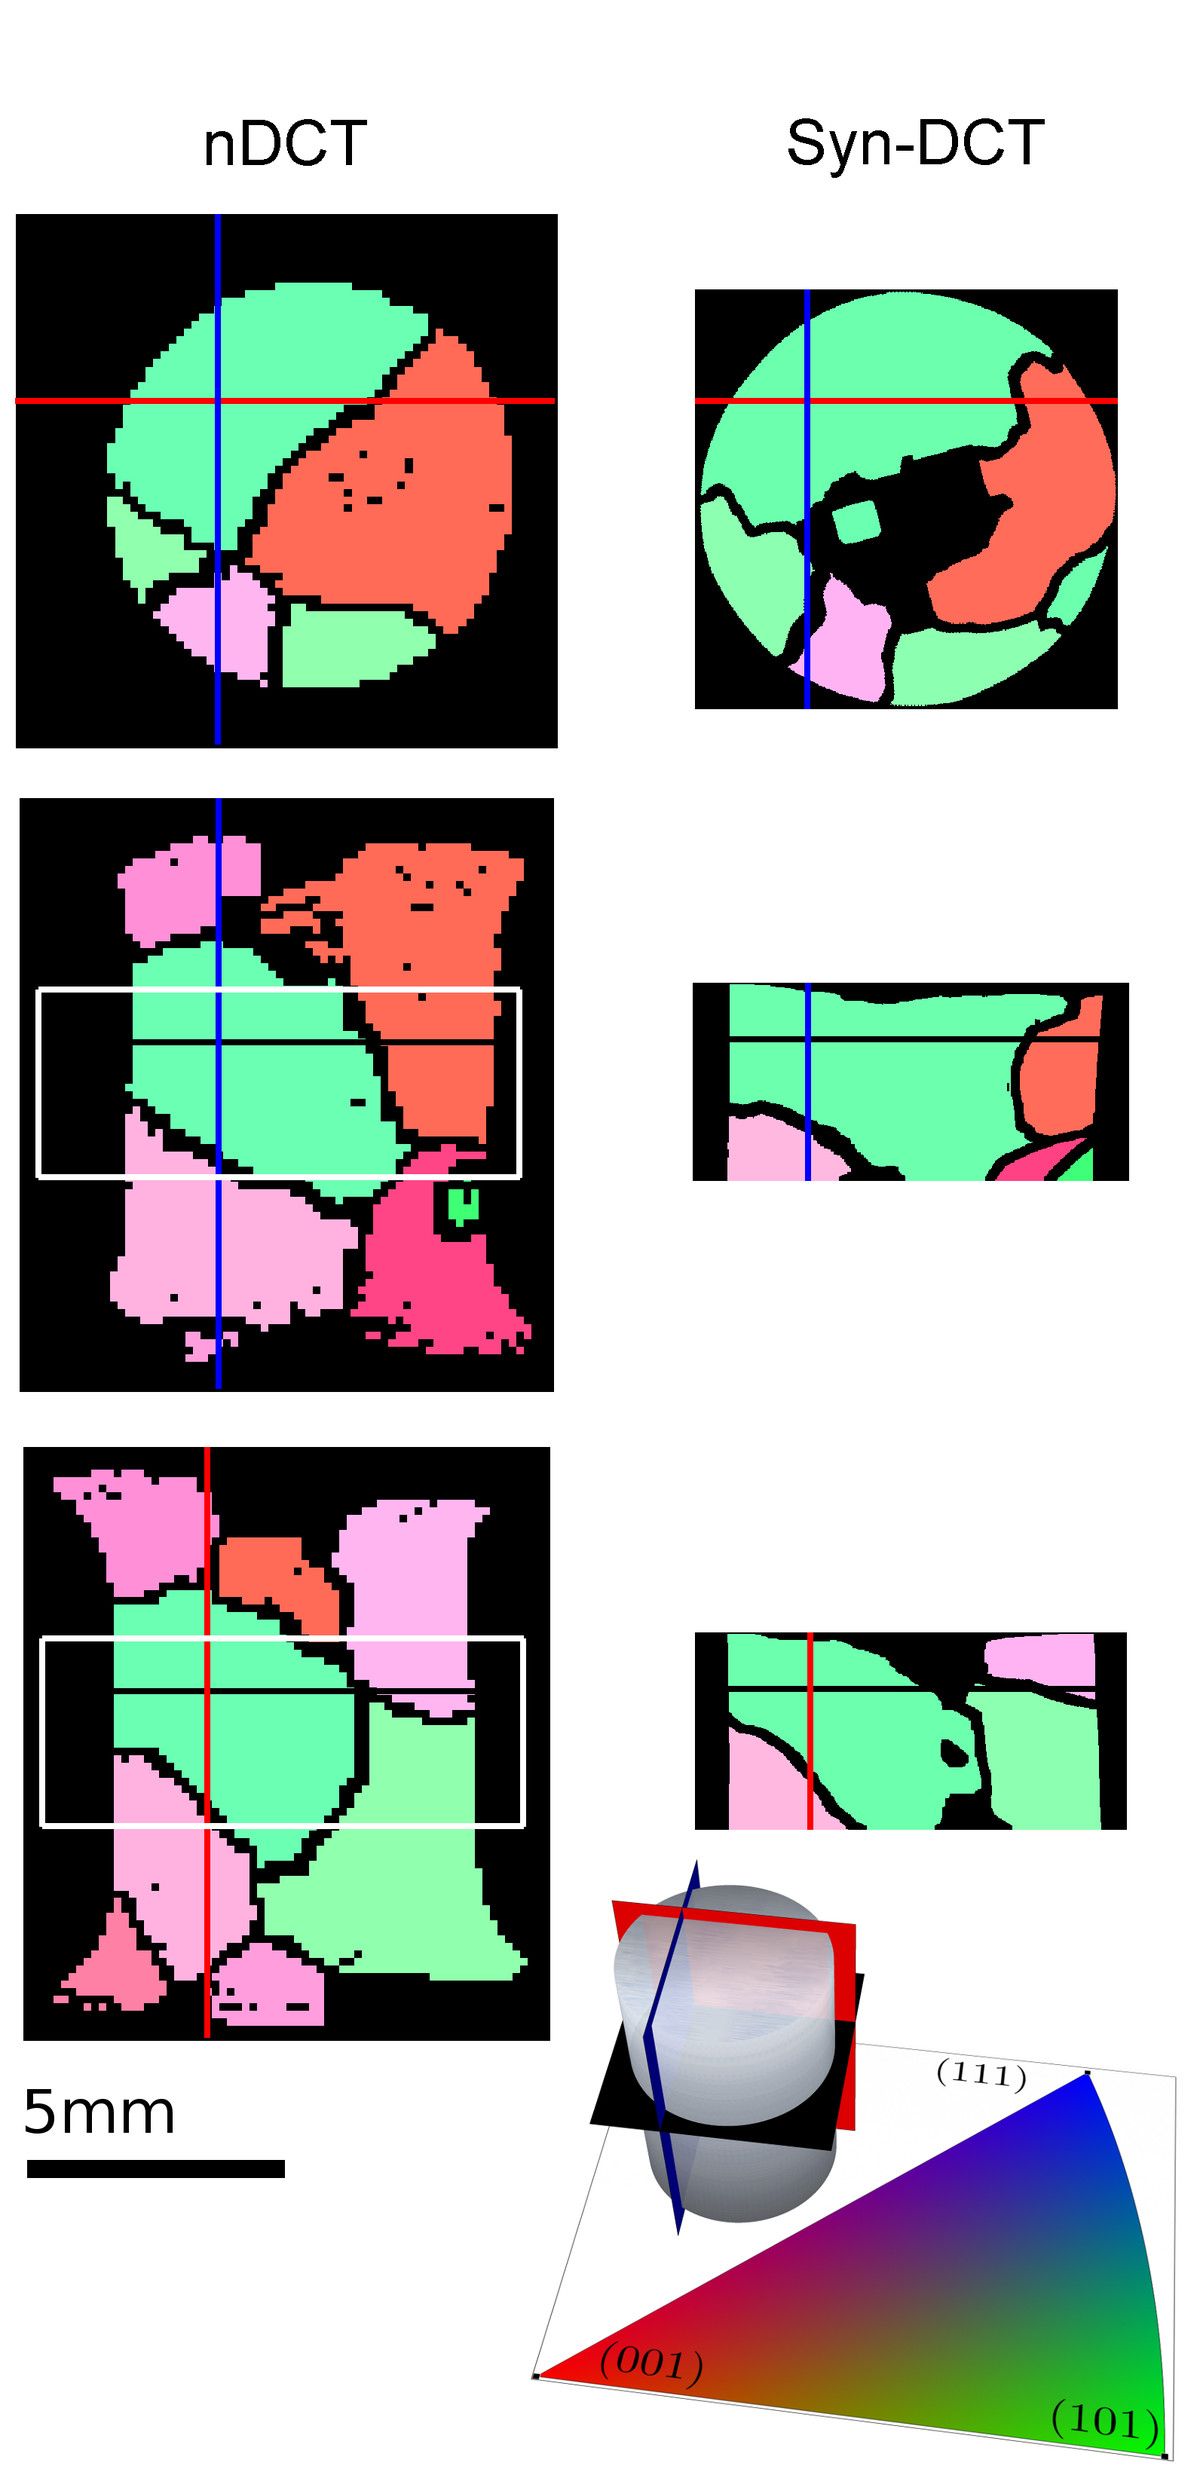 Figure 3: Ortho-slices through the neutron (left) and synchrotron (right) DCT reconstruction of the same aluminium sample, with the location of the cut planes clarified in the 3D legend. The crystallites are color coded by their orientation based on the inverse pole figure color map for a top view on the sample.